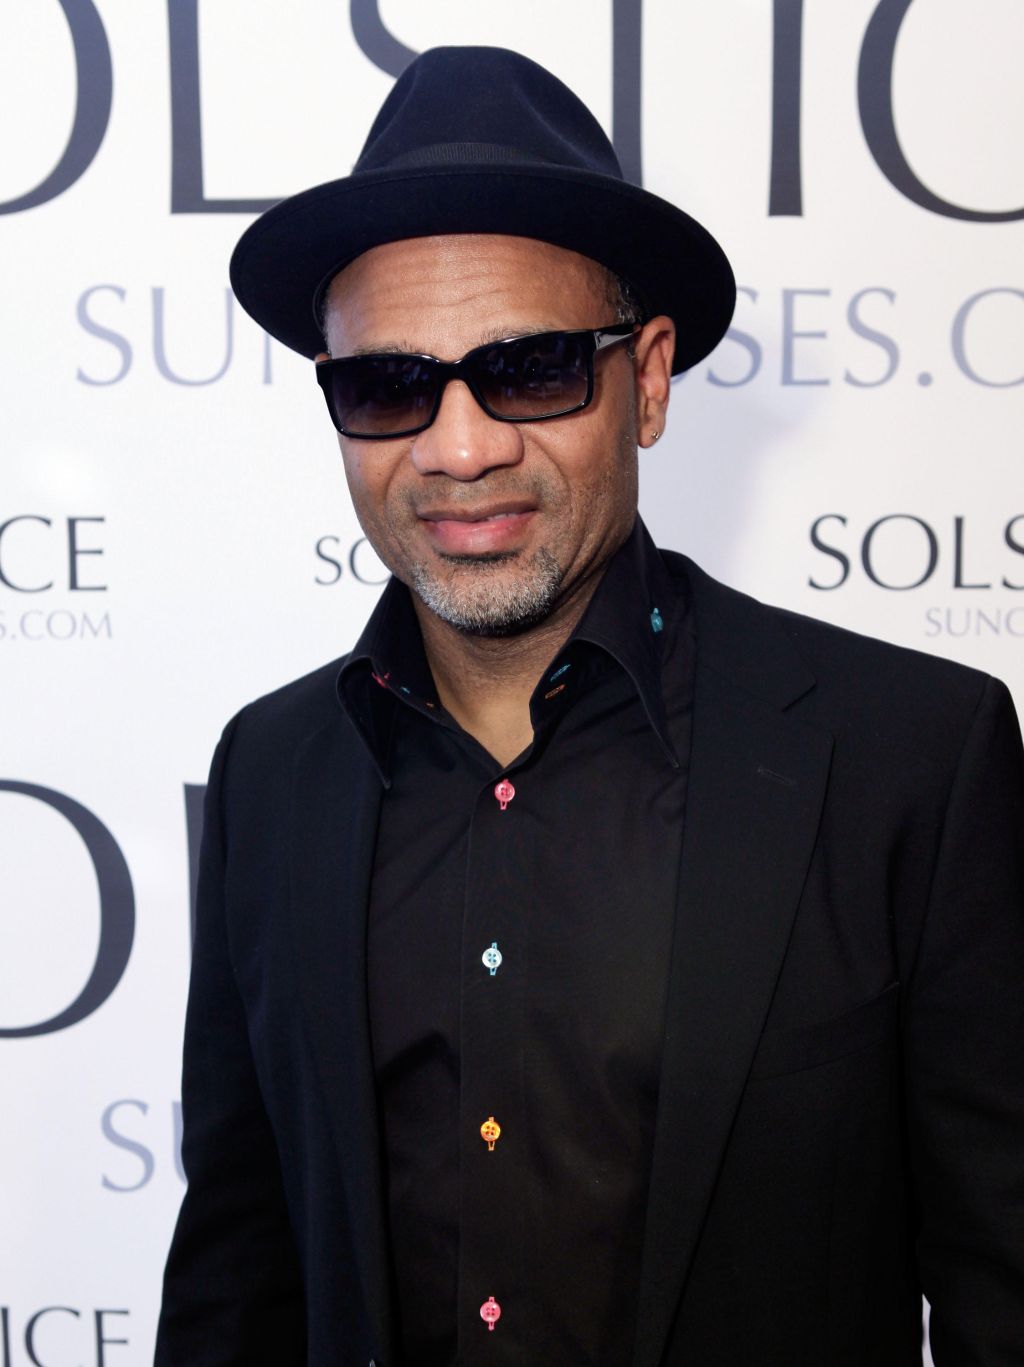 SOLSTICEsunglasses.com And Safilo USA At The 53rd Annual GRAMMY Awards - GRAMMY Gift Lounge - Day 3